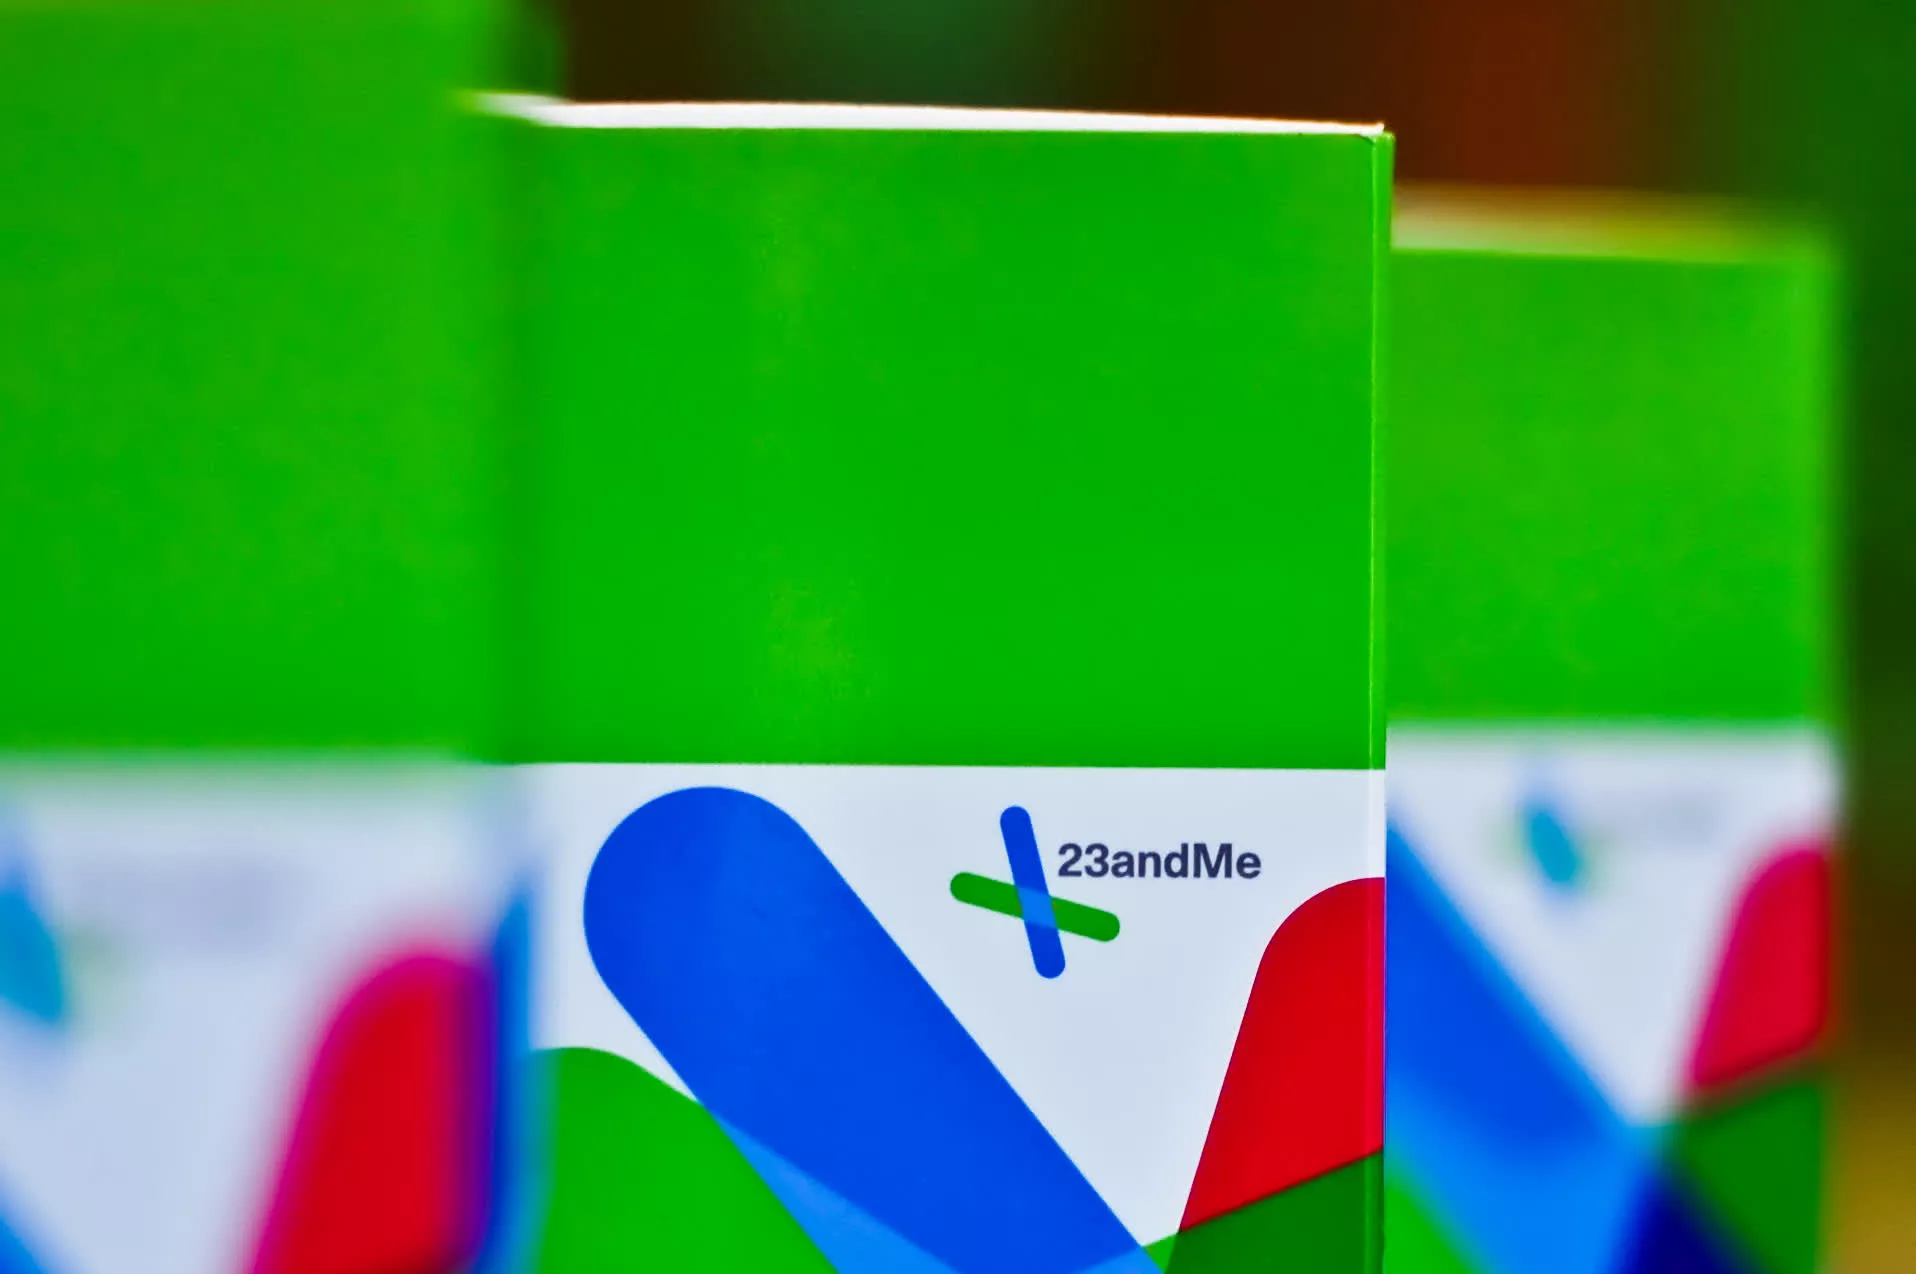 23andMe confirms last year’s massive data breach went unnoticed for five months, hackers stole raw genotype data